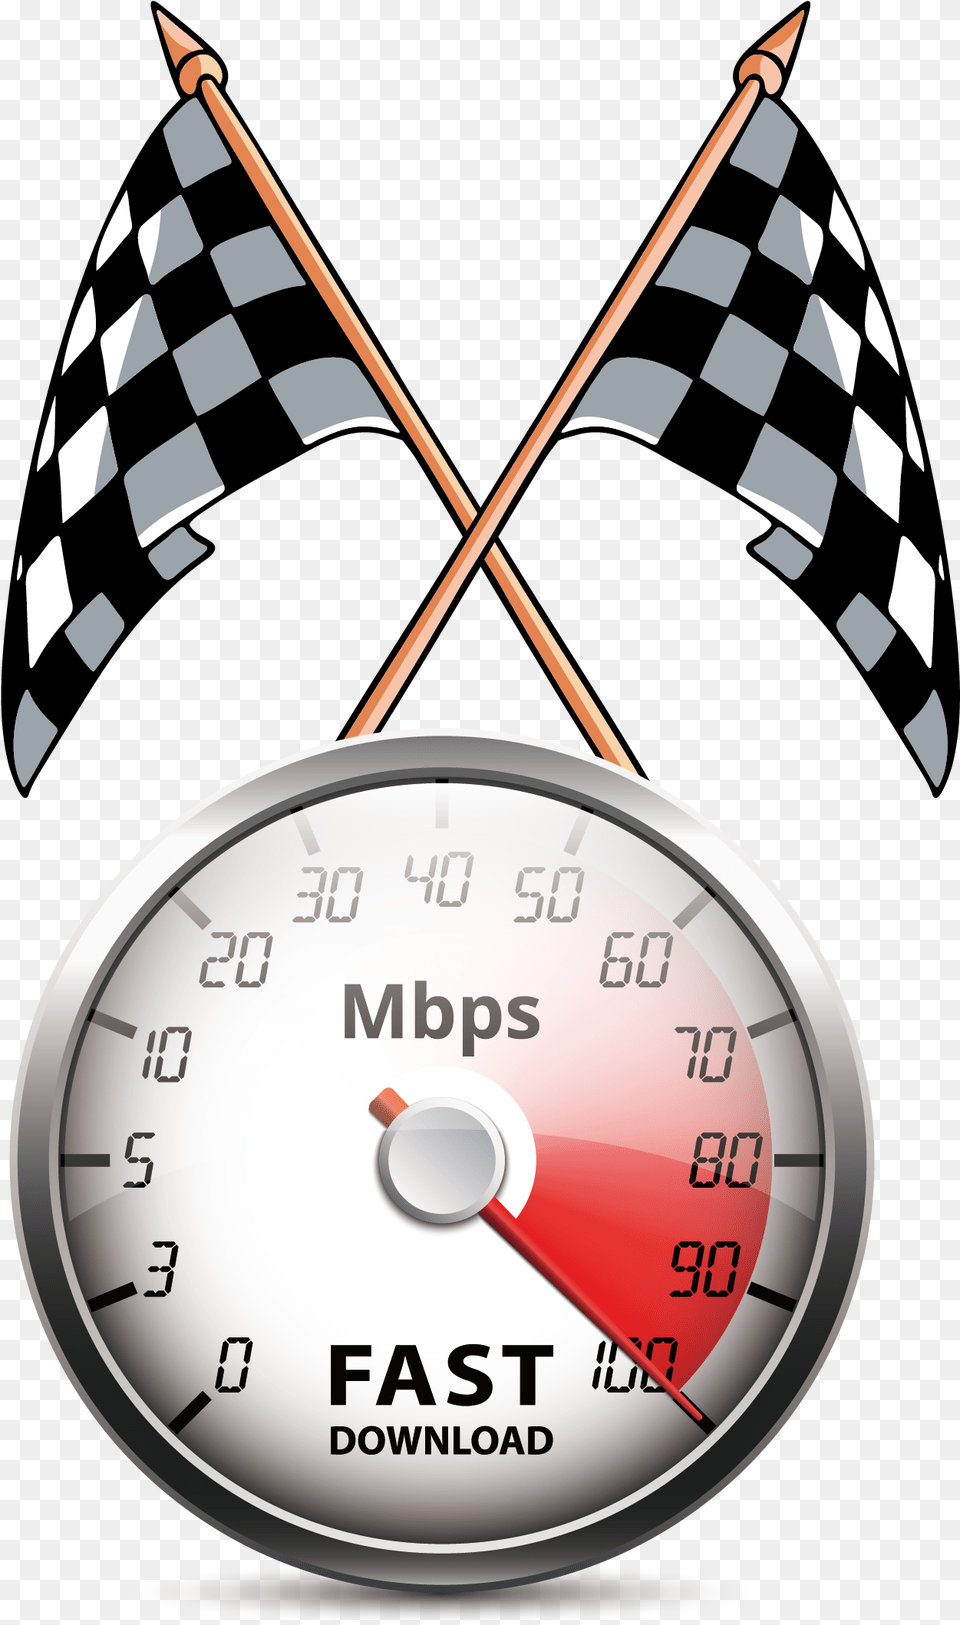 Speedometer Car Race Flags Image With No Race Car Speedometer, Gauge, Smoke Pipe, Tachometer Free Png